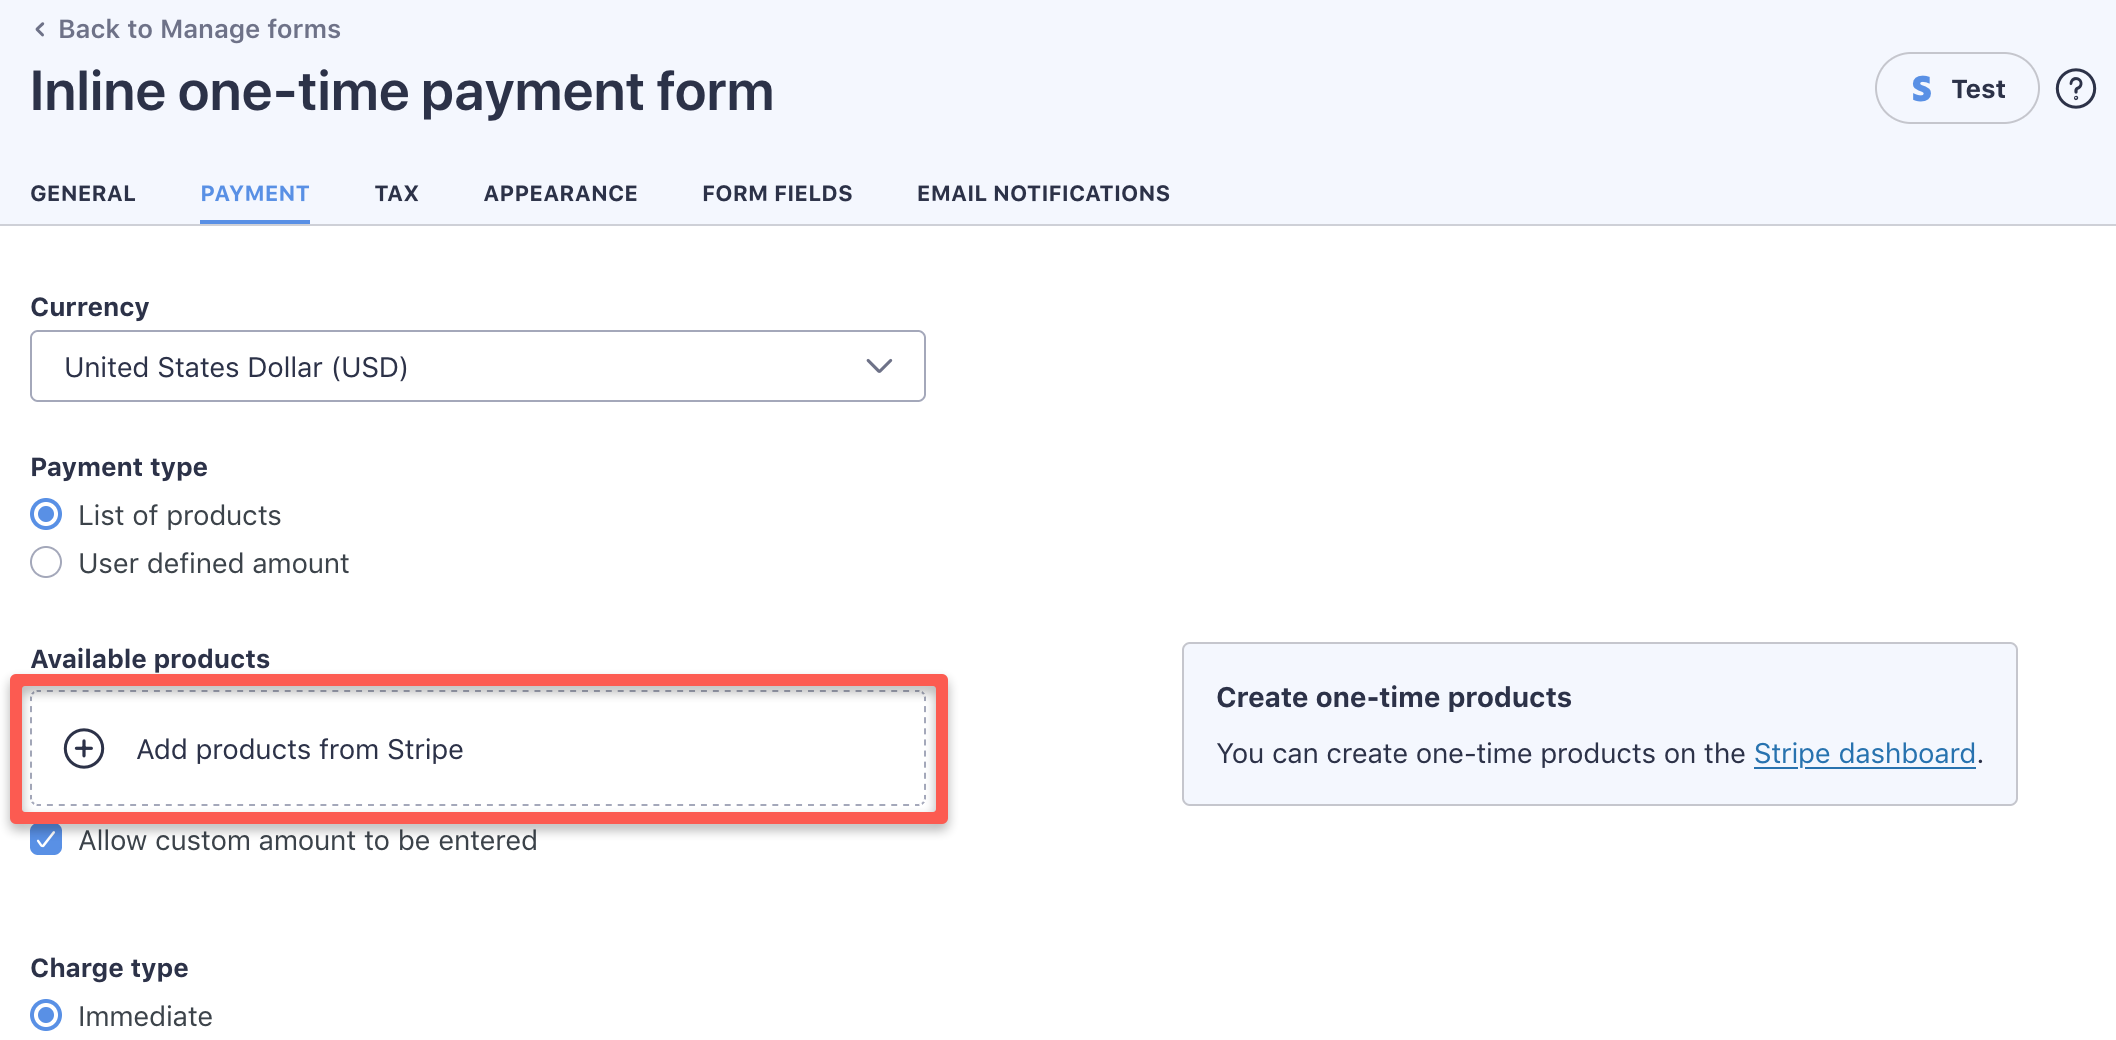 Press the 'Add products from Stripe' button on the 'Payment' tab to add products to the form